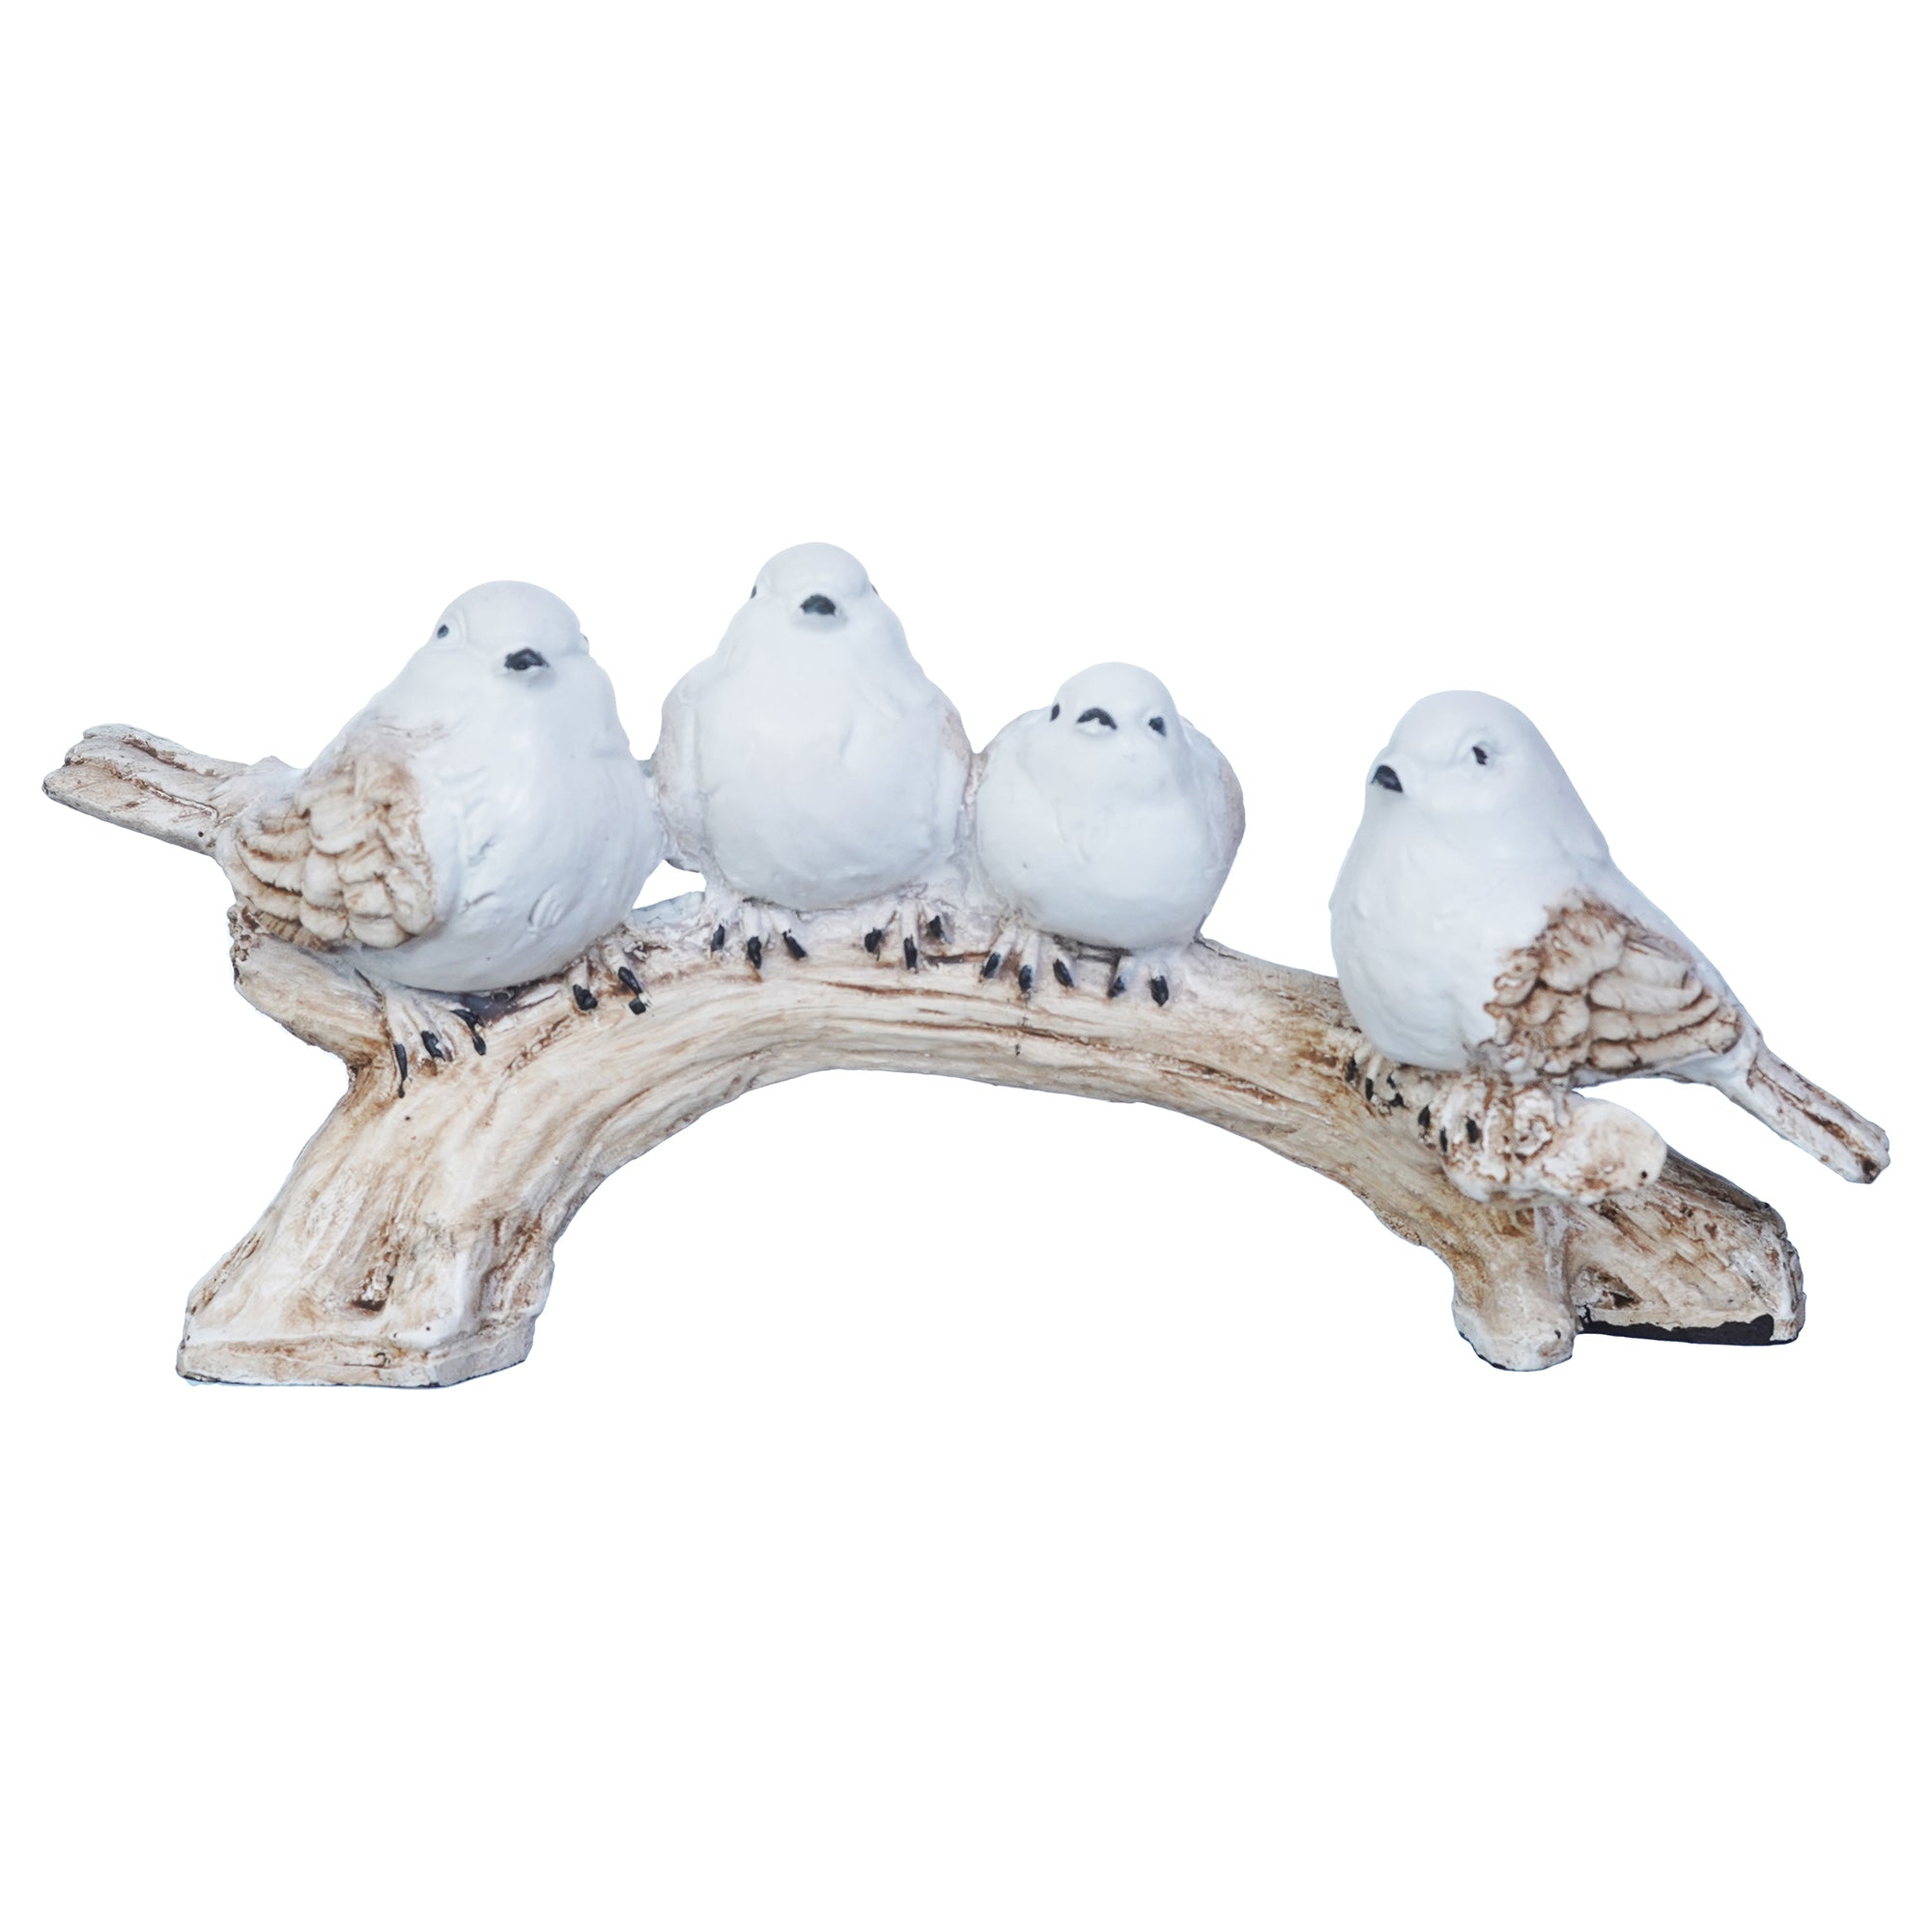 Polyresin Handcrafted 4 White Bird Statues Sitting on Tree Branch Decorative Showpiece 2